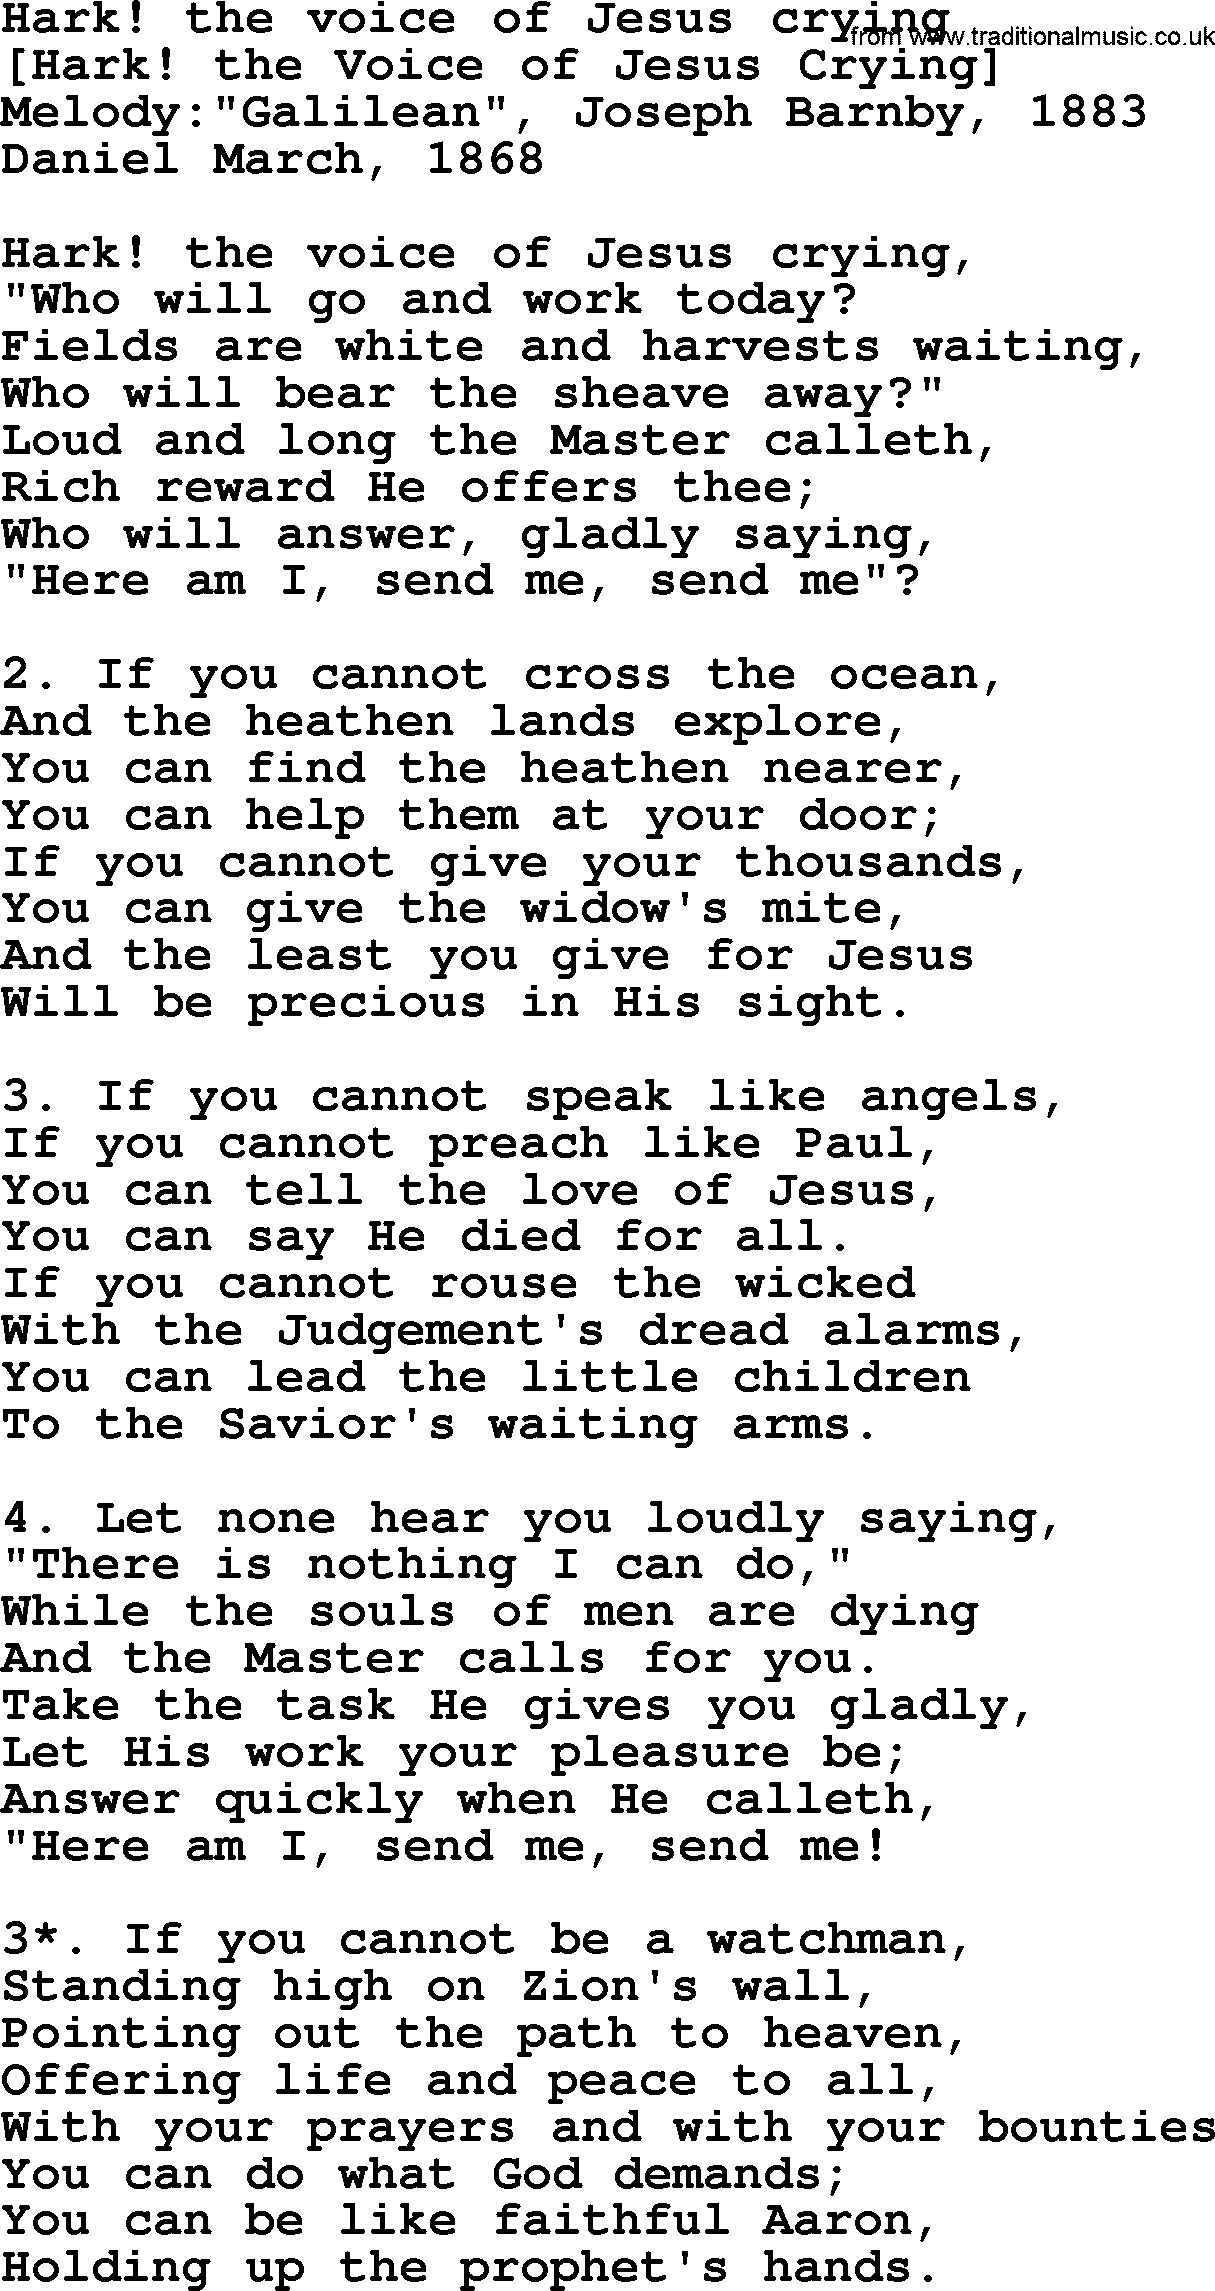 Old American Song: Hark! The Voice Of Jesus Crying, lyrics